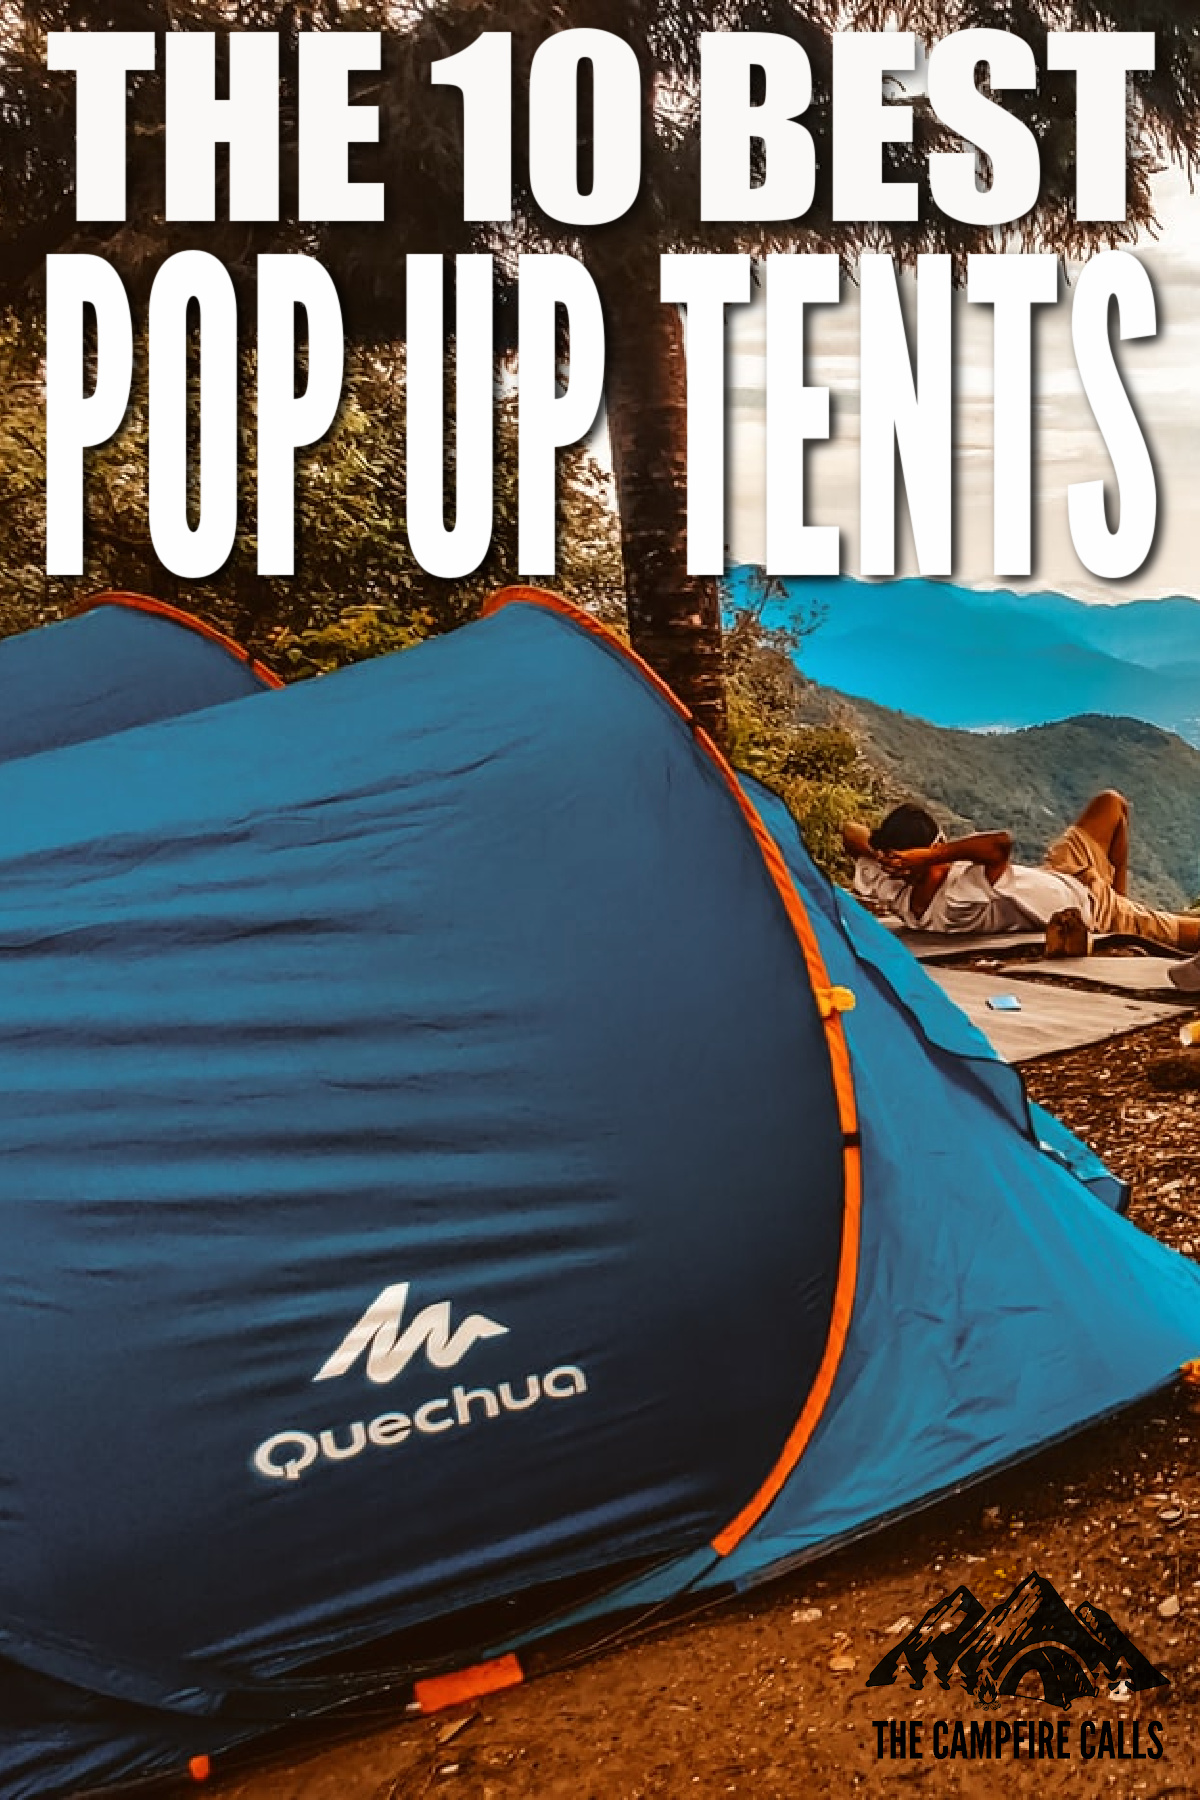 The 10 Best Pop Up Tents of 2021 For Easy Camping